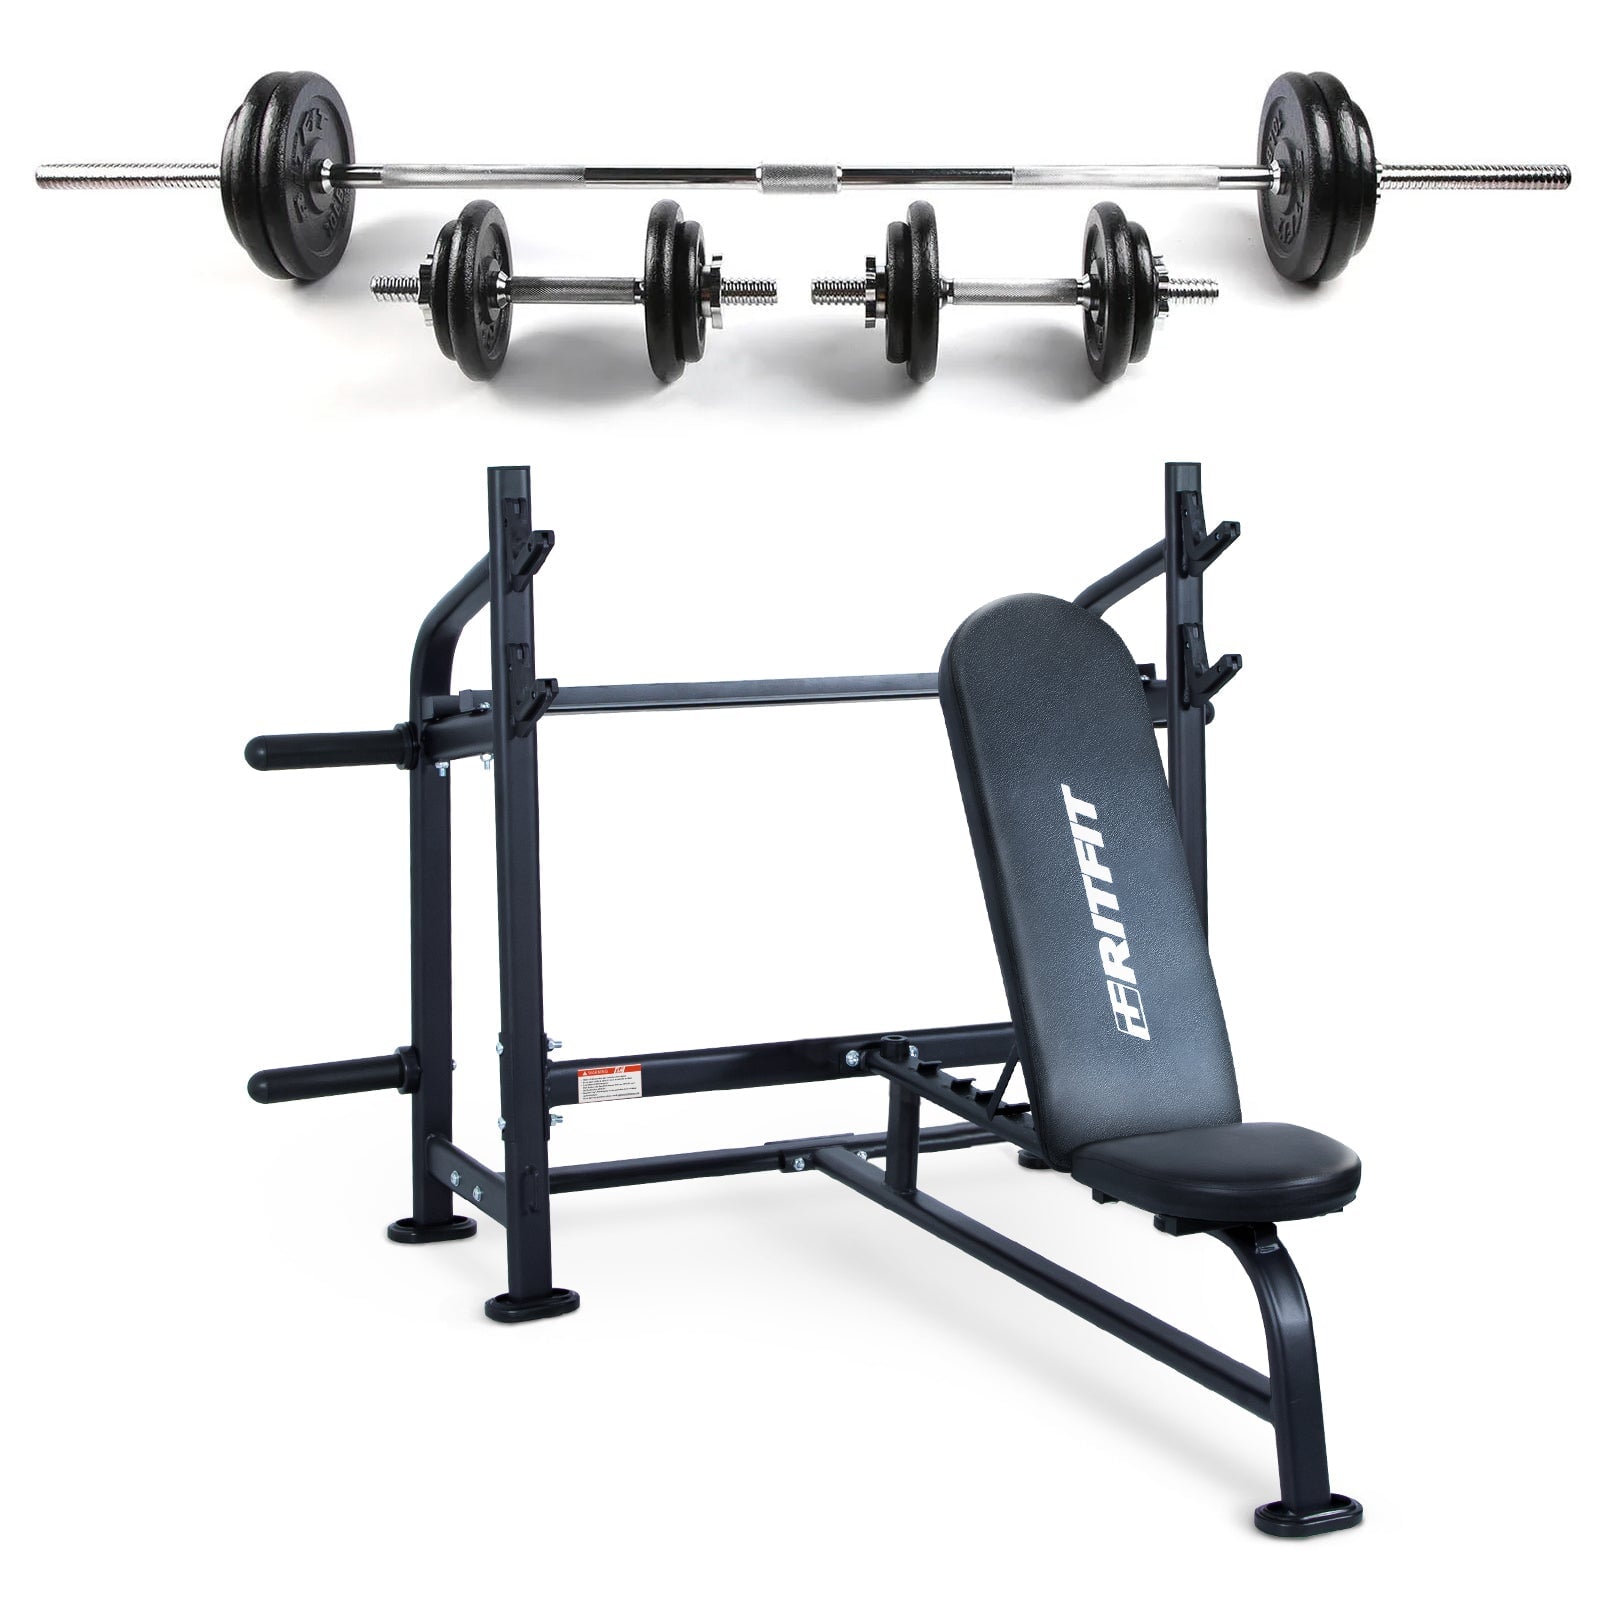 RitFit POB01 Olympic Weight Bench Weight Bench RitFit Bench+80LB 